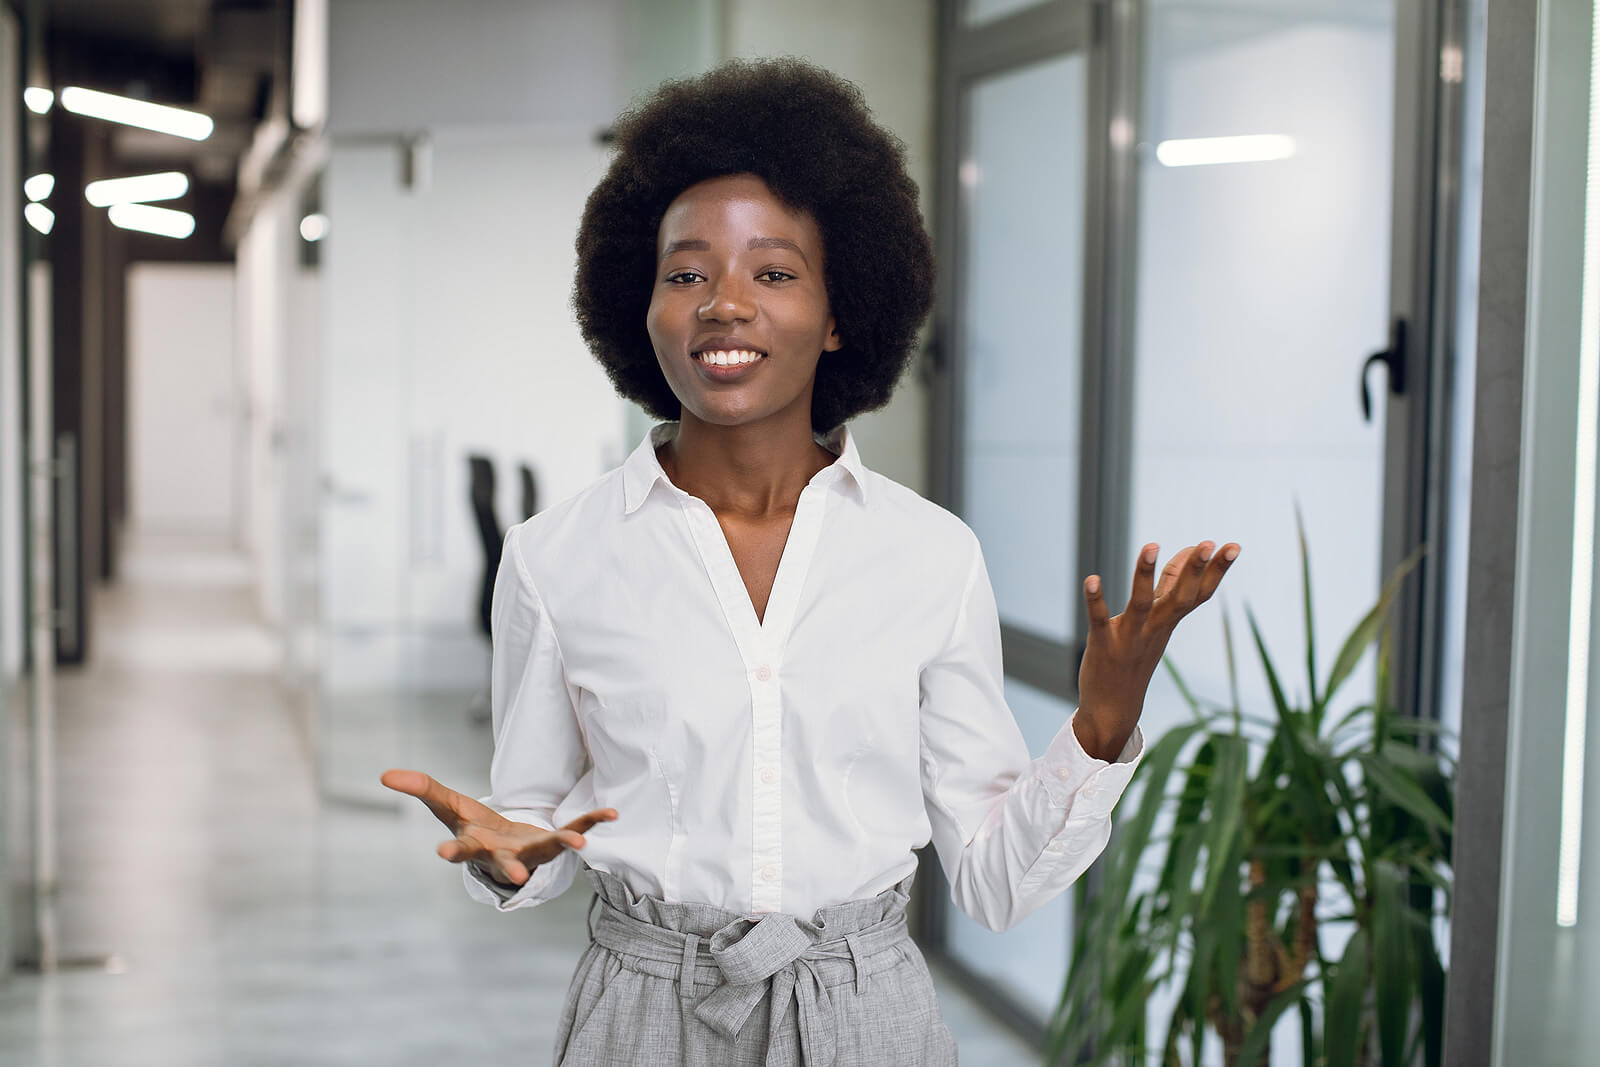 A young professional Black woman looking confident and stood in an office